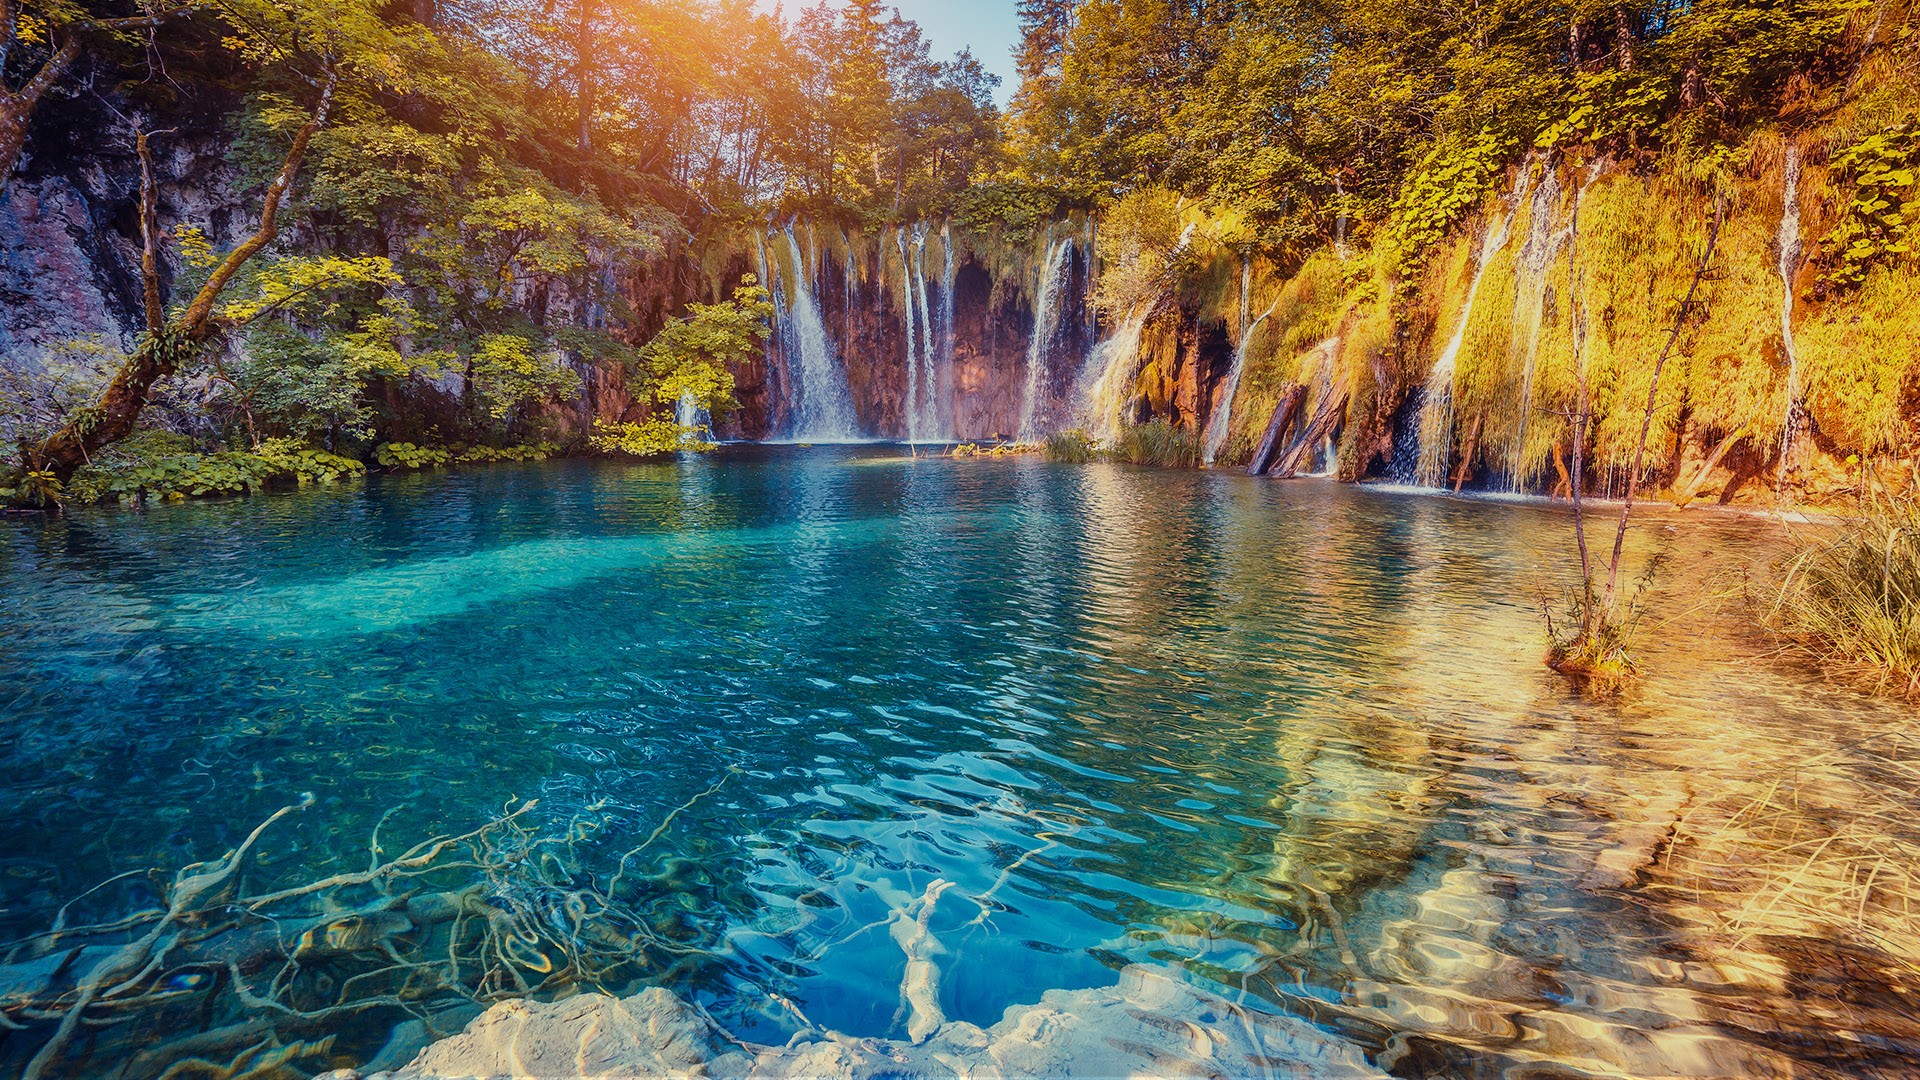 General 1920x1080 nature landscape trees water waterfall water ripples forest clear water plants Plitvice Lakes National Park rocks Croatia